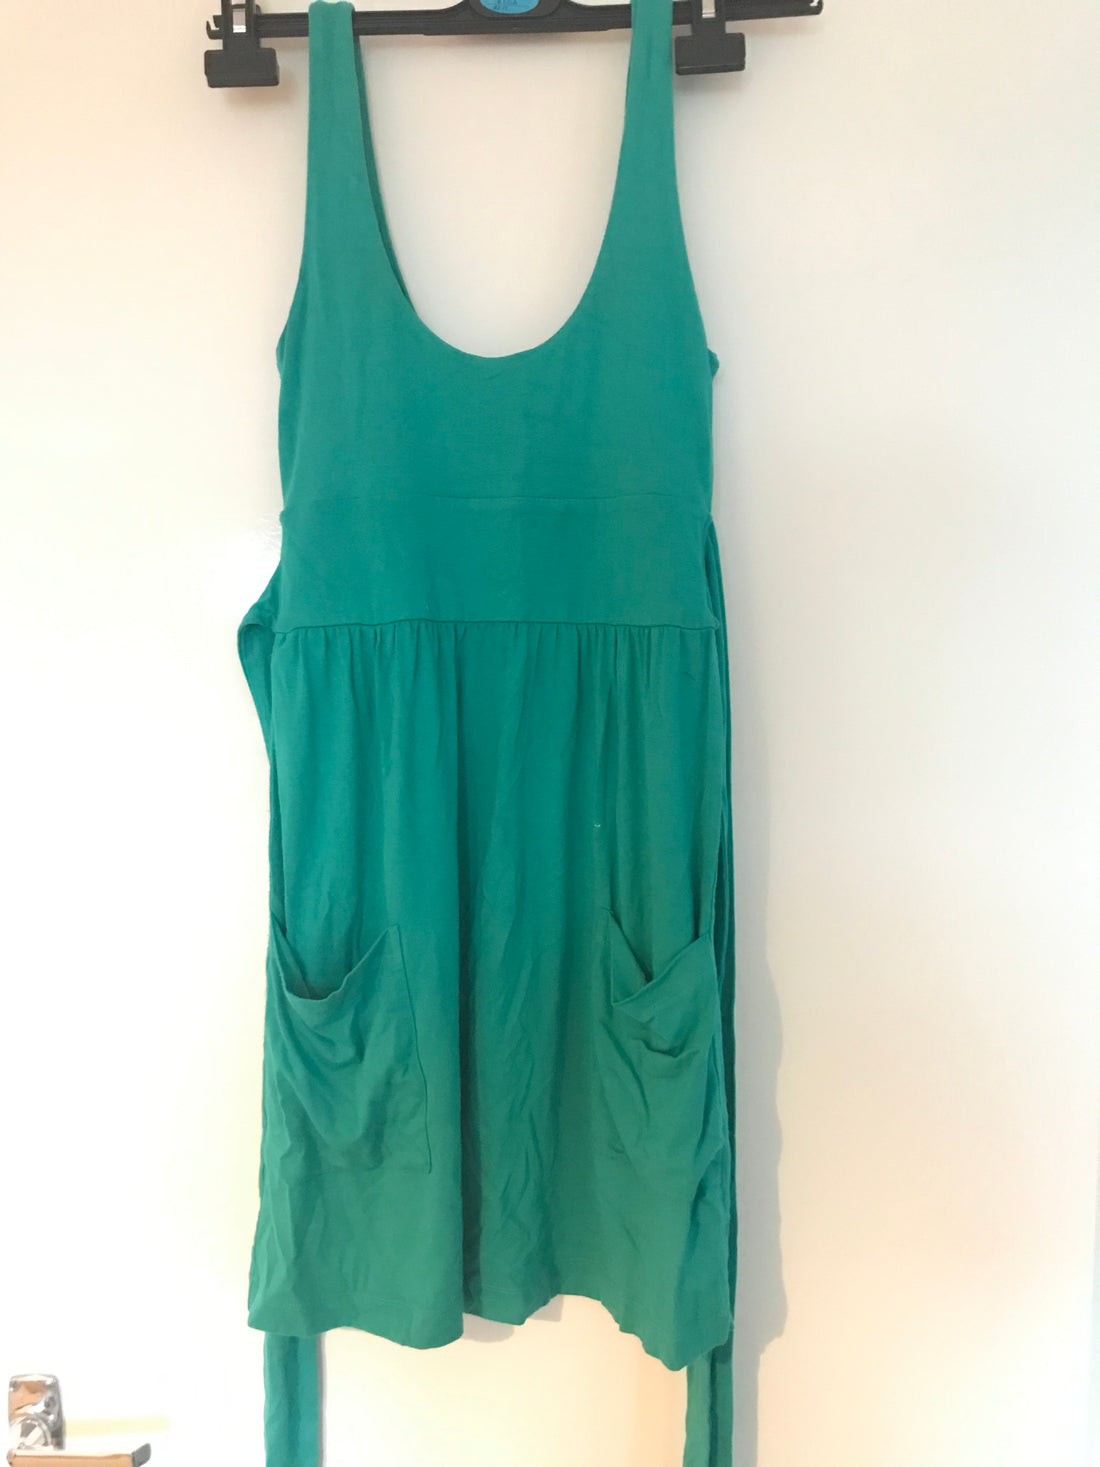 Preloved Turquoise dress